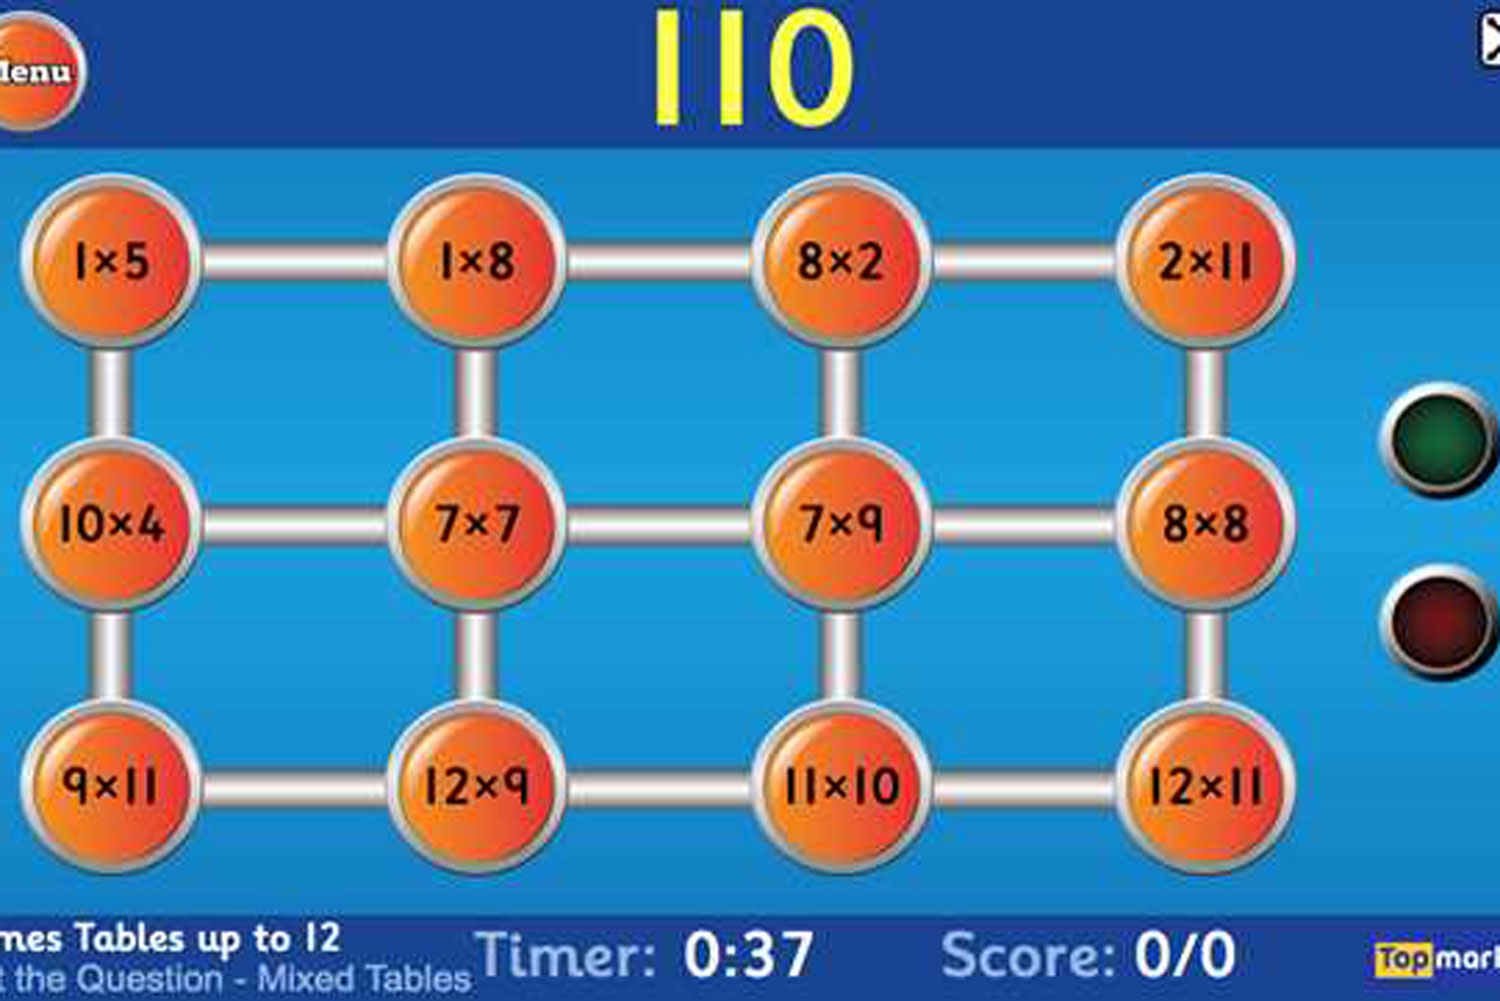 multiplication table games free